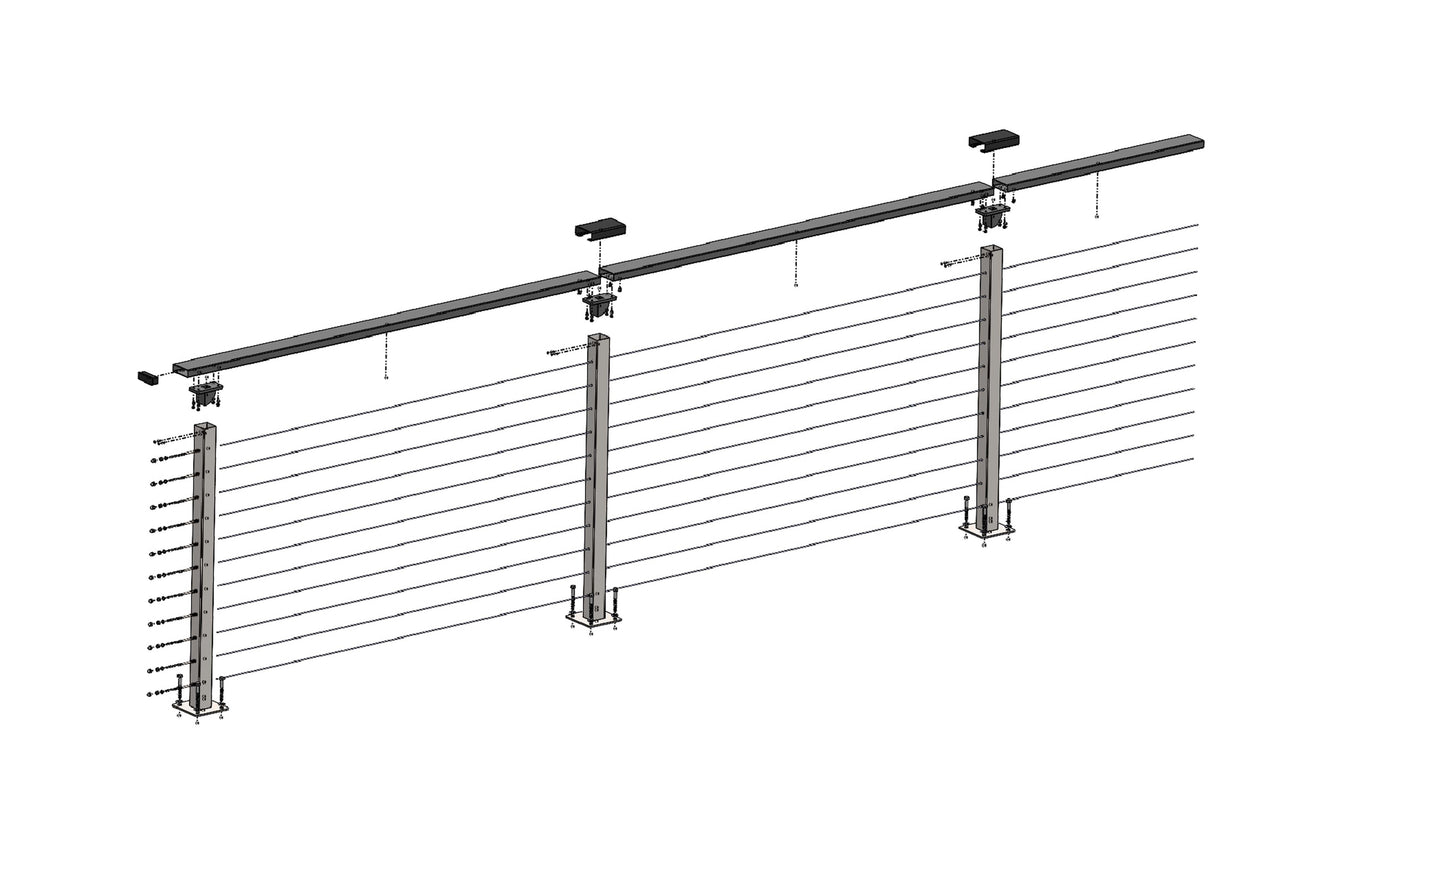 70 ft. x 36 in. Bronze Deck Cable Railing, Base Mount